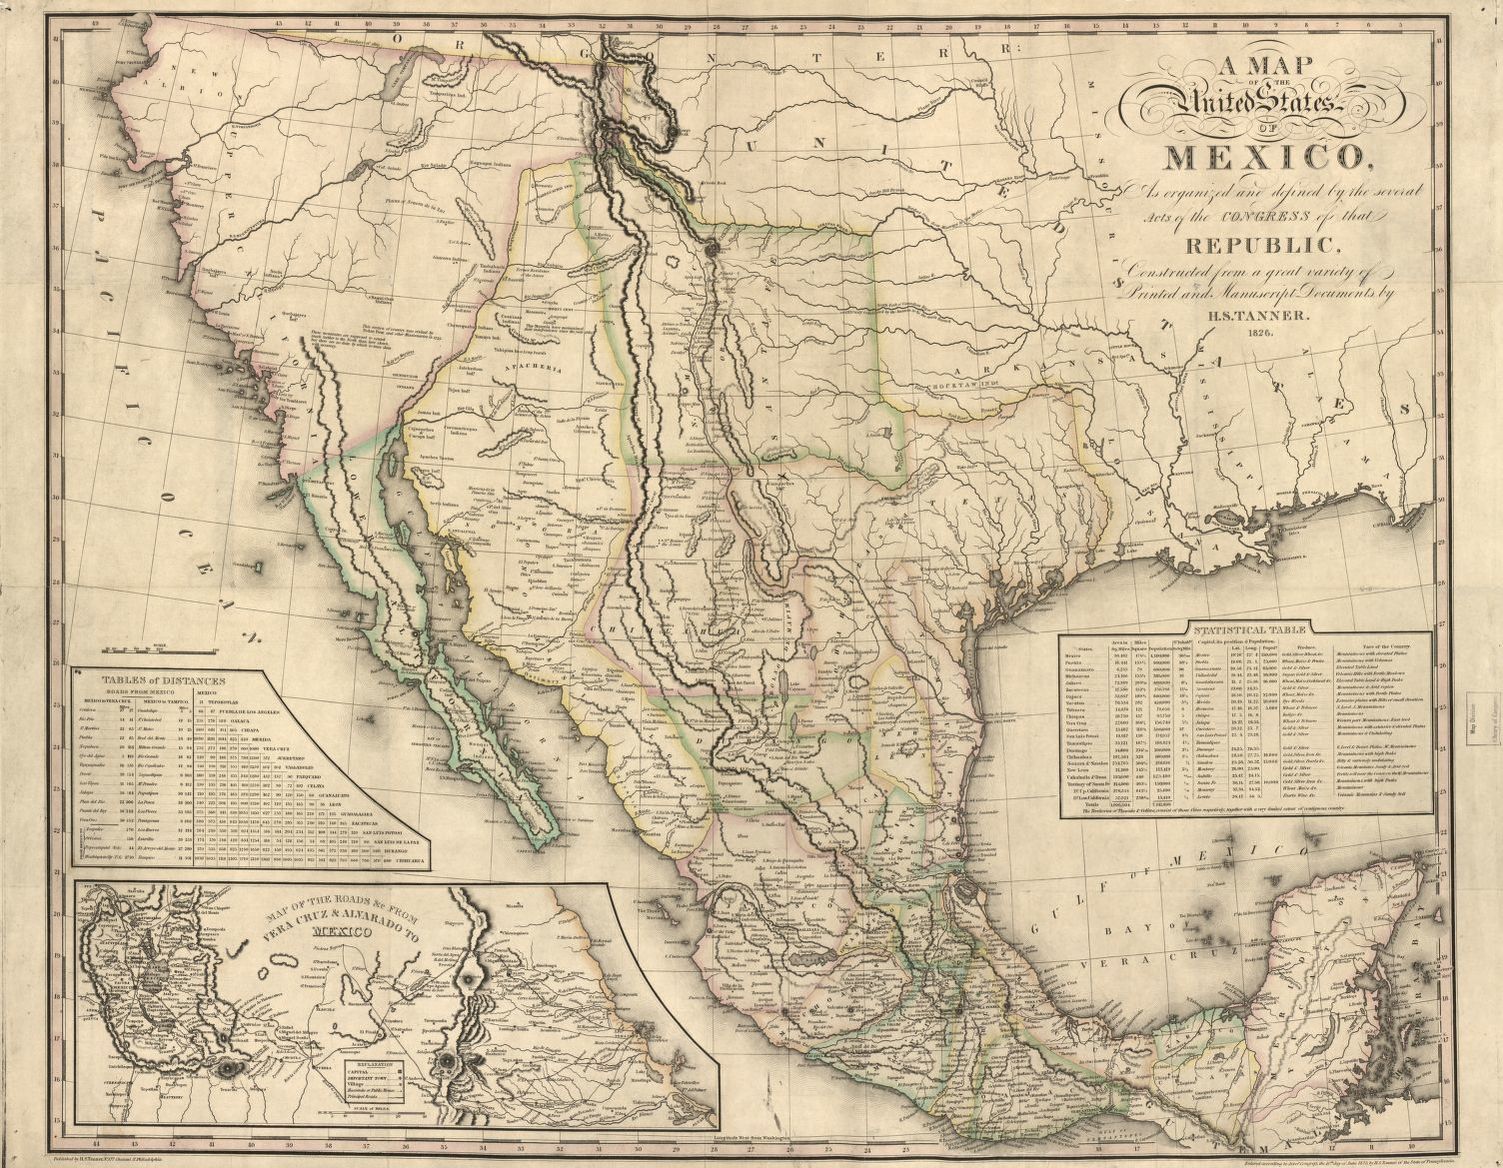 1826 color political map of Mexico